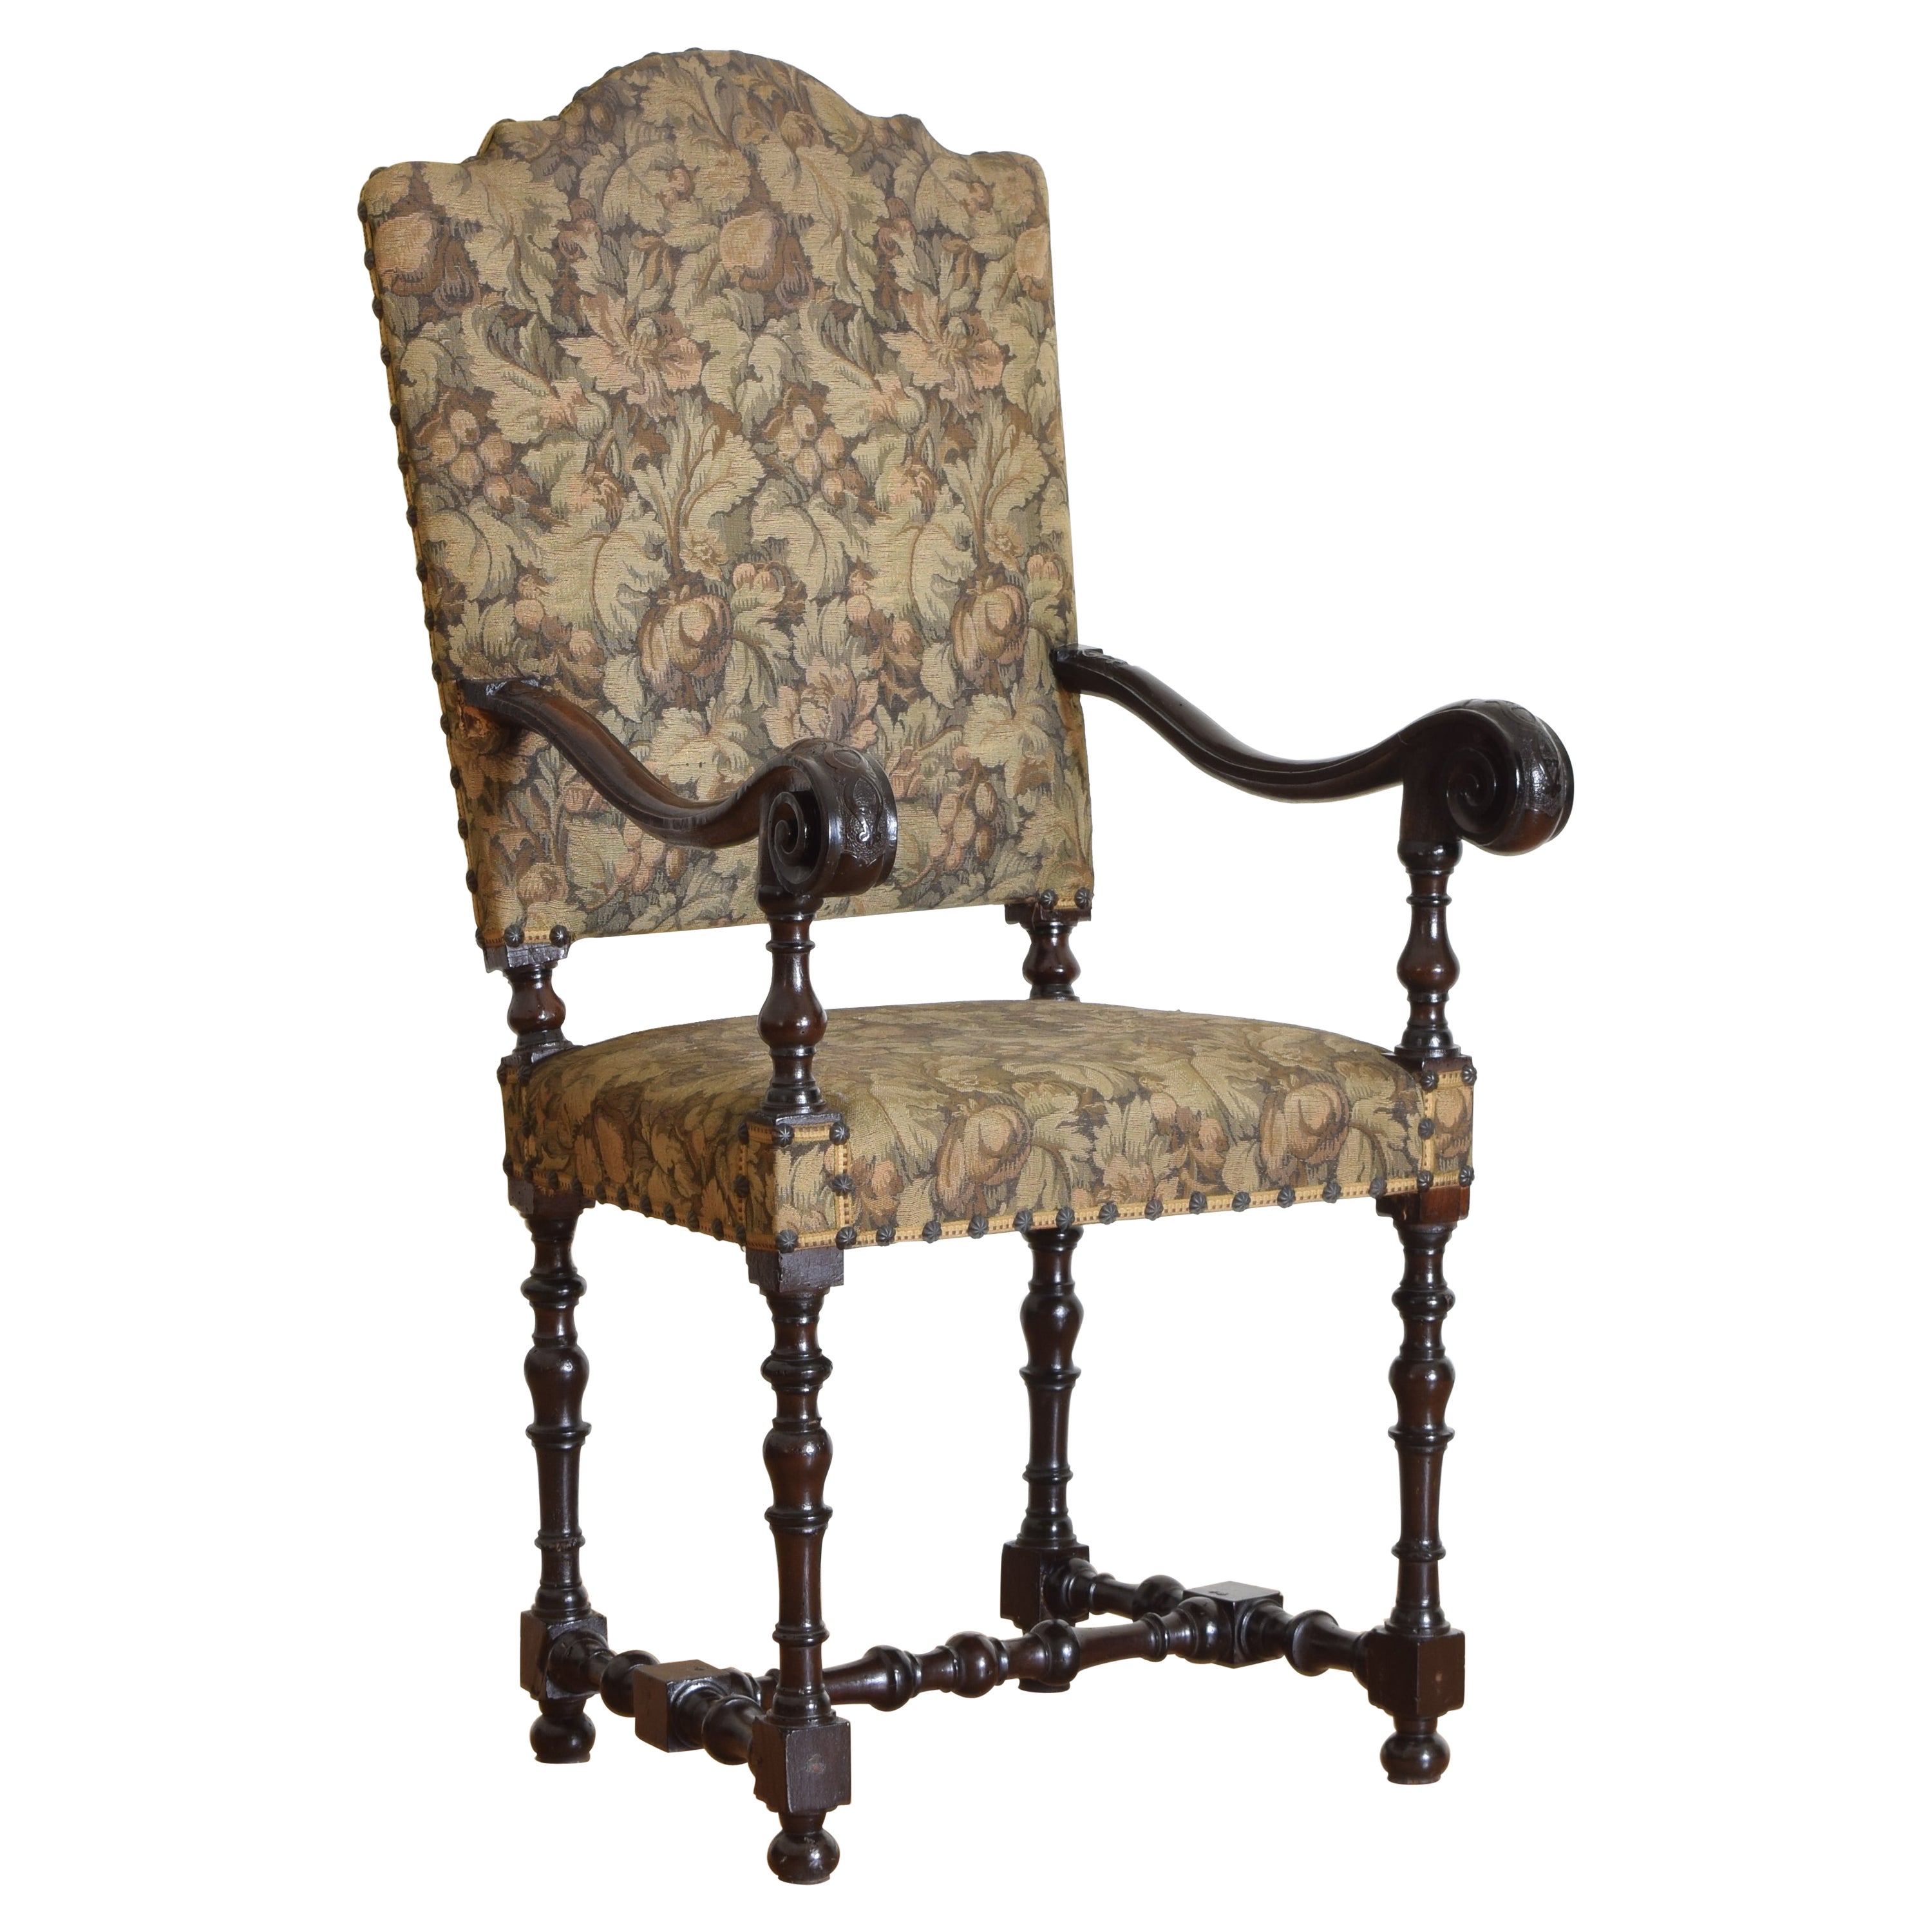 Italian, Emiliana, Baroque Large Carved & Shaped Walnut Open Armchair, ca. 1680 For Sale